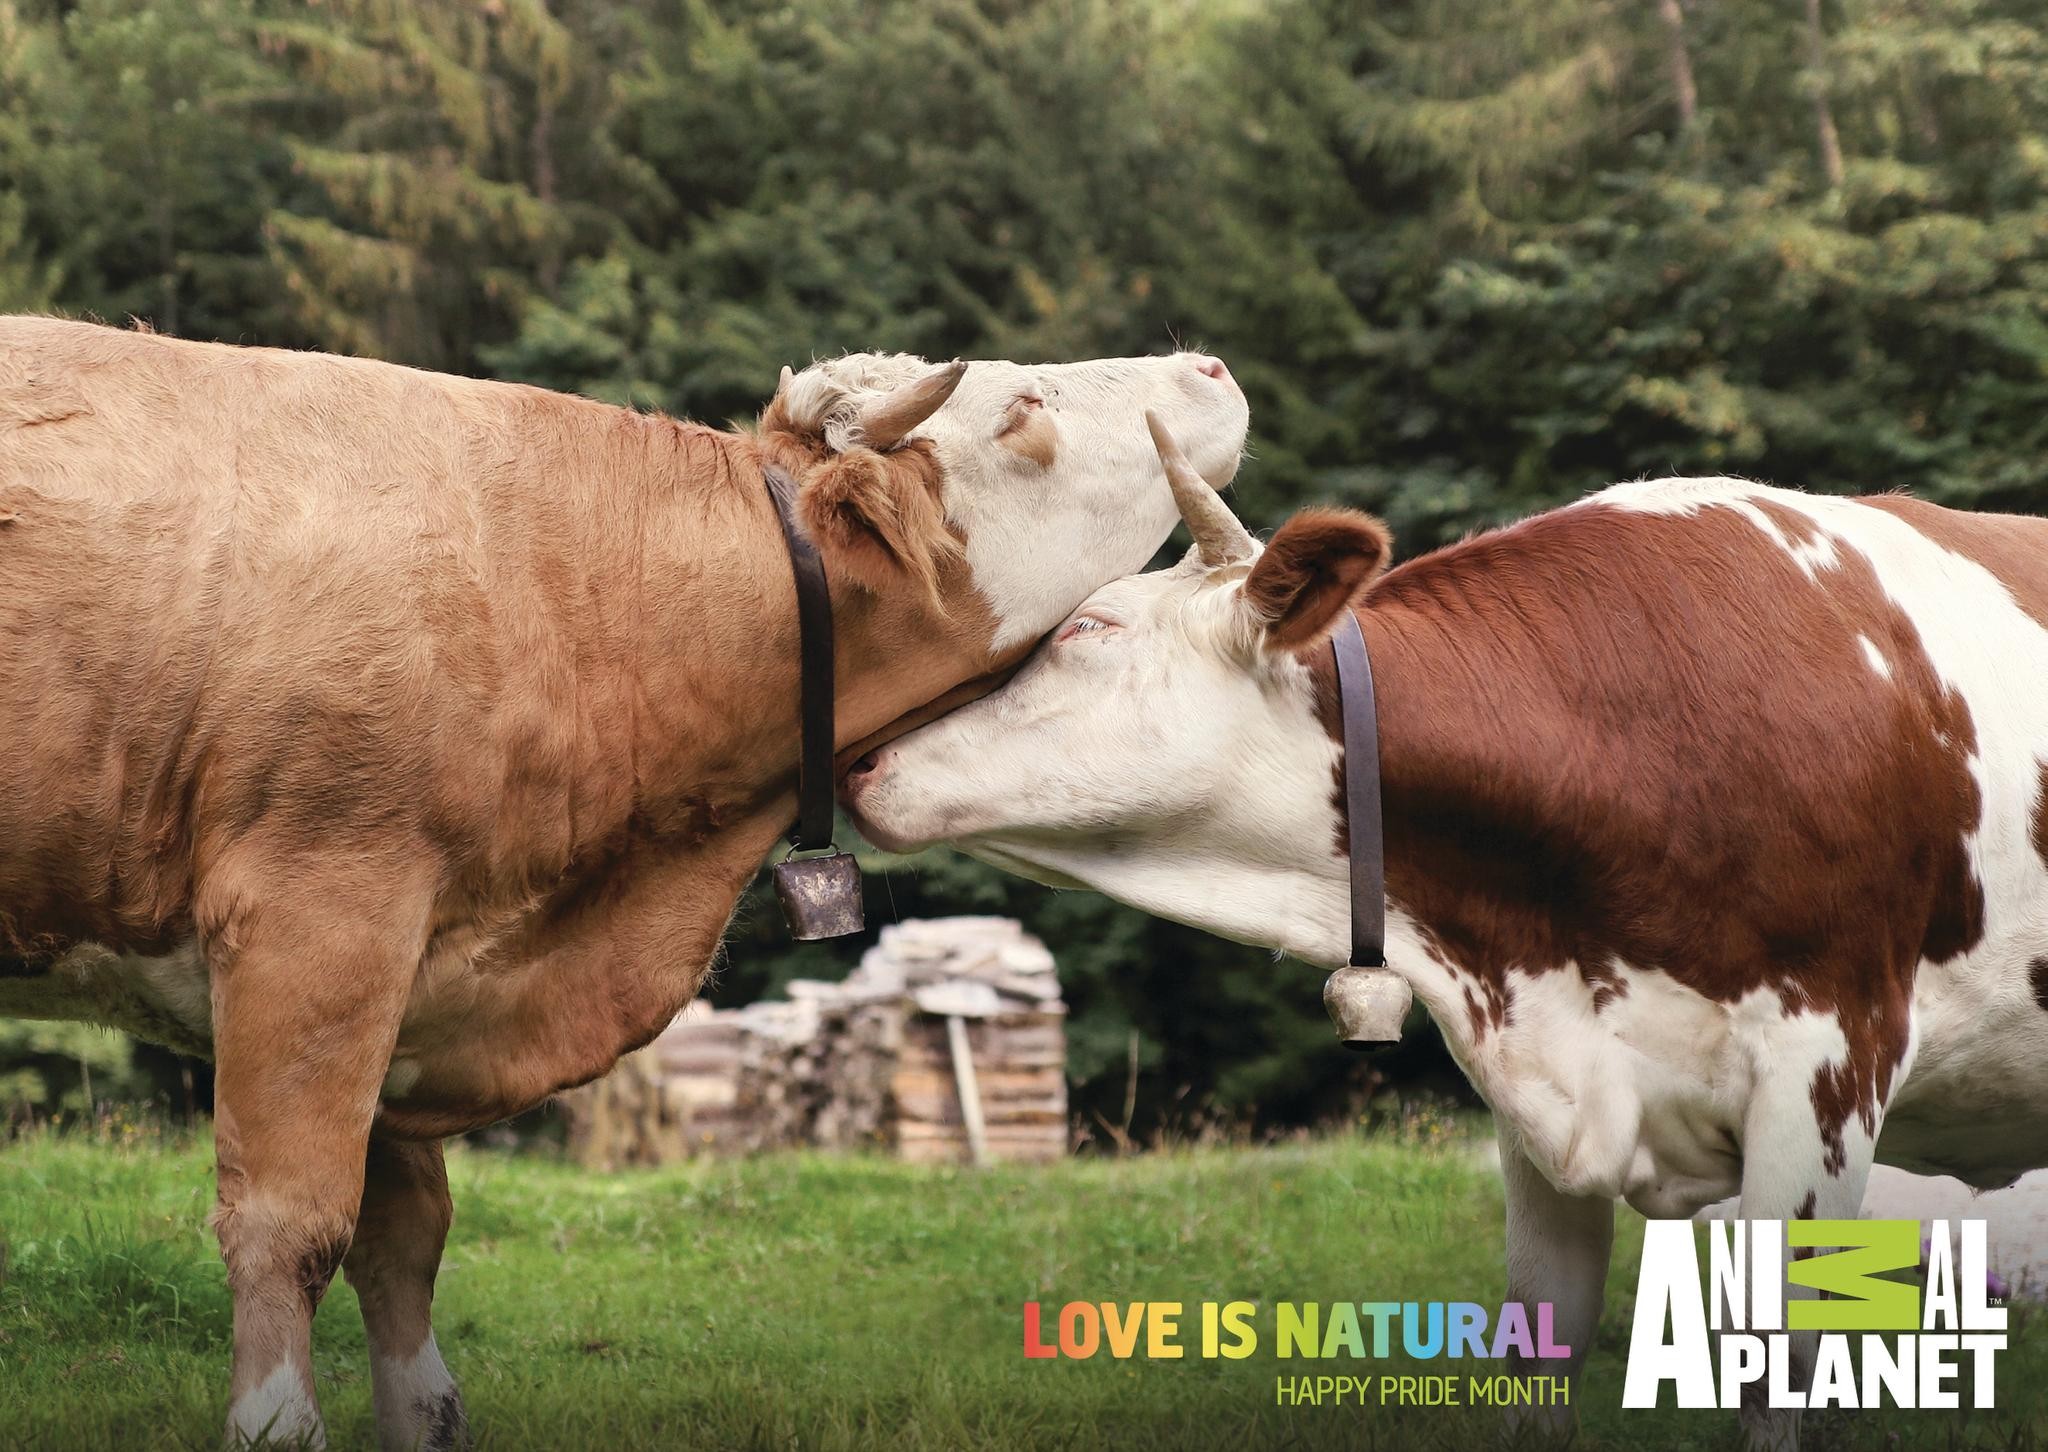 Animal Planet "Love Is Natural"